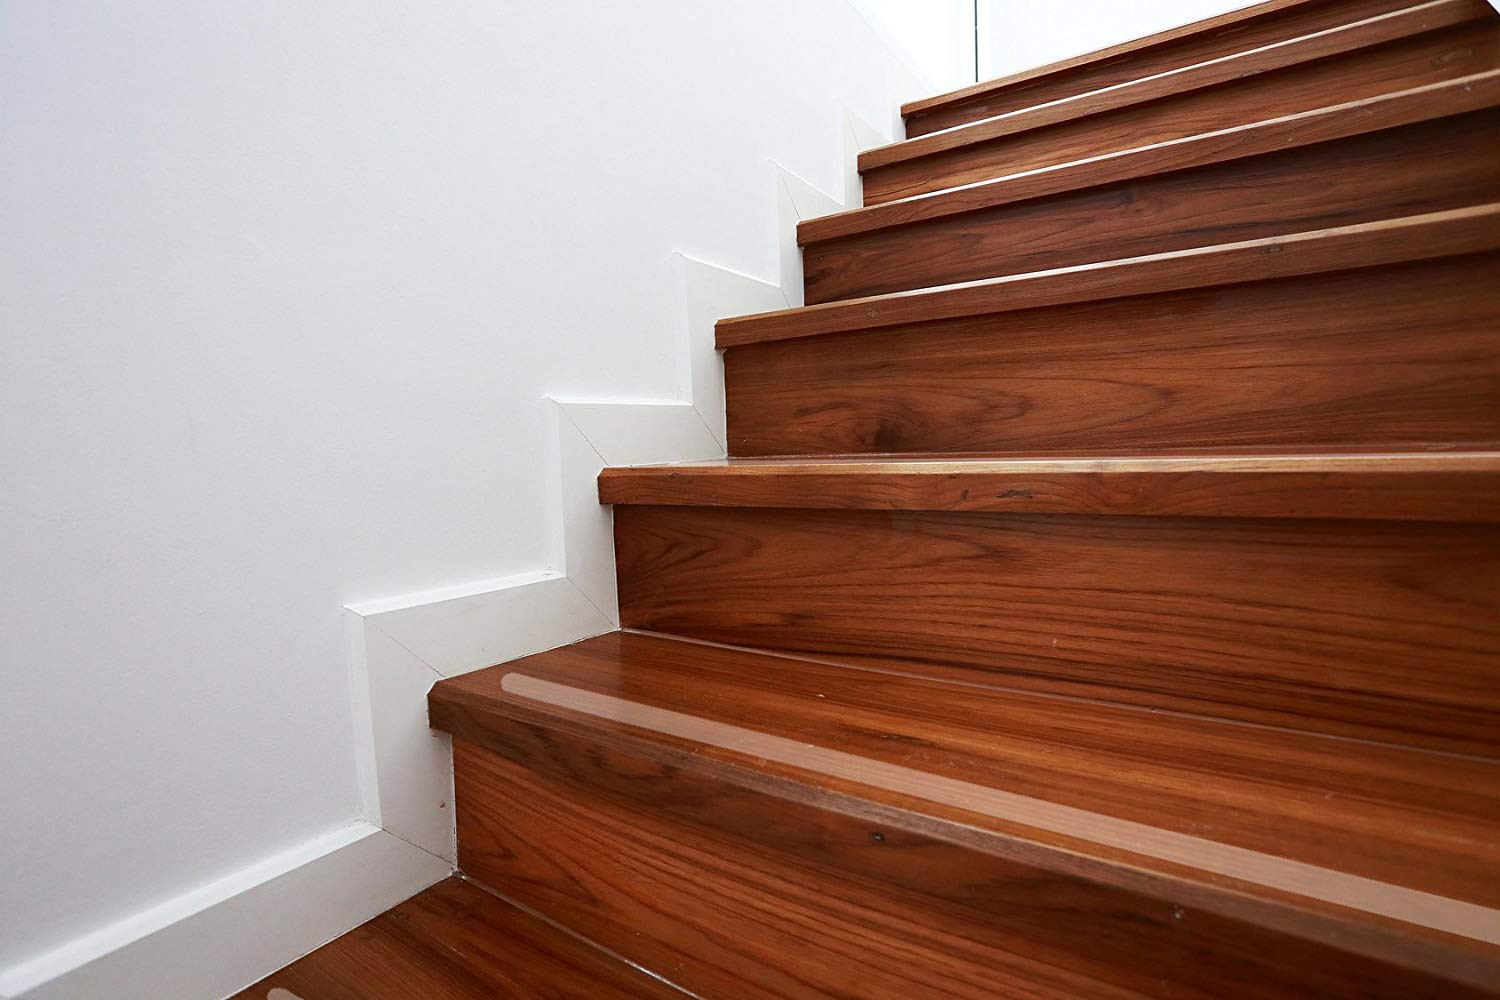 29 Wonderful Hardwood Floor Stairs Slippery 2024 free download hardwood floor stairs slippery of kara grip 15 non slip rubber approx 60 cm x 3 cm transparent with regard to grip 15 non slip rubber approx 60 cm x 3 cm transparent its also for child and d